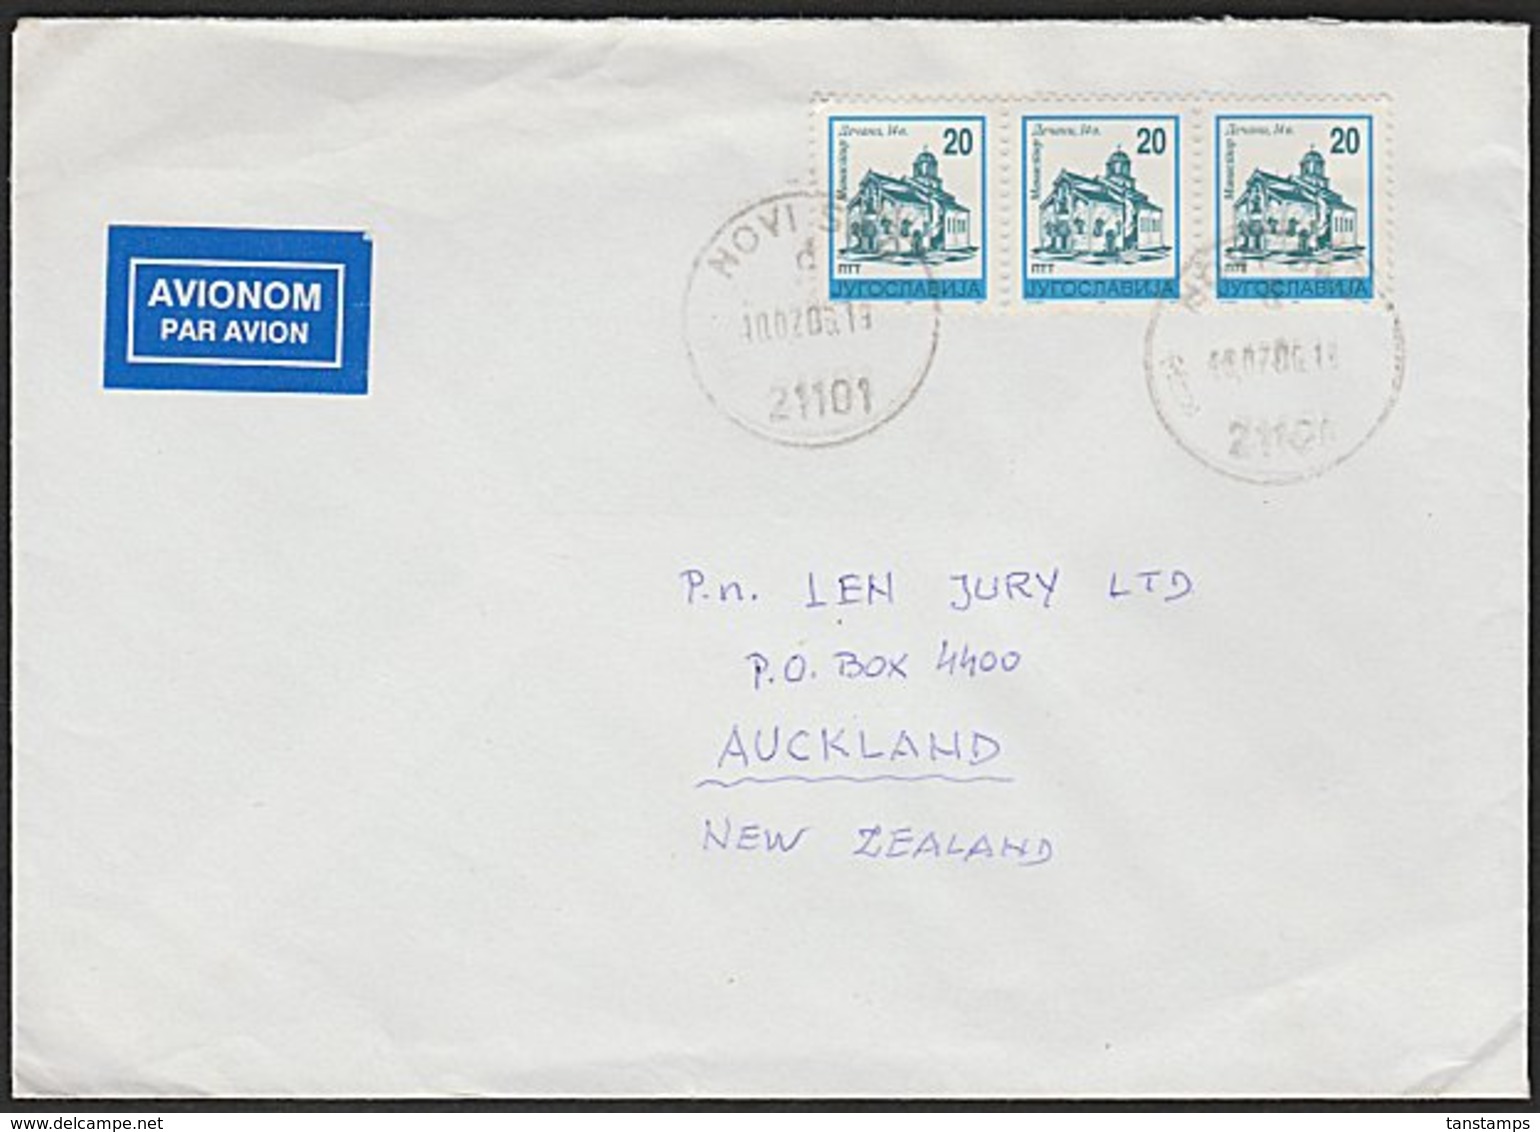 YUGOSLAVIA - NEW ZEALAND COMMERCIAL AIRMAIL COVER - Airmail